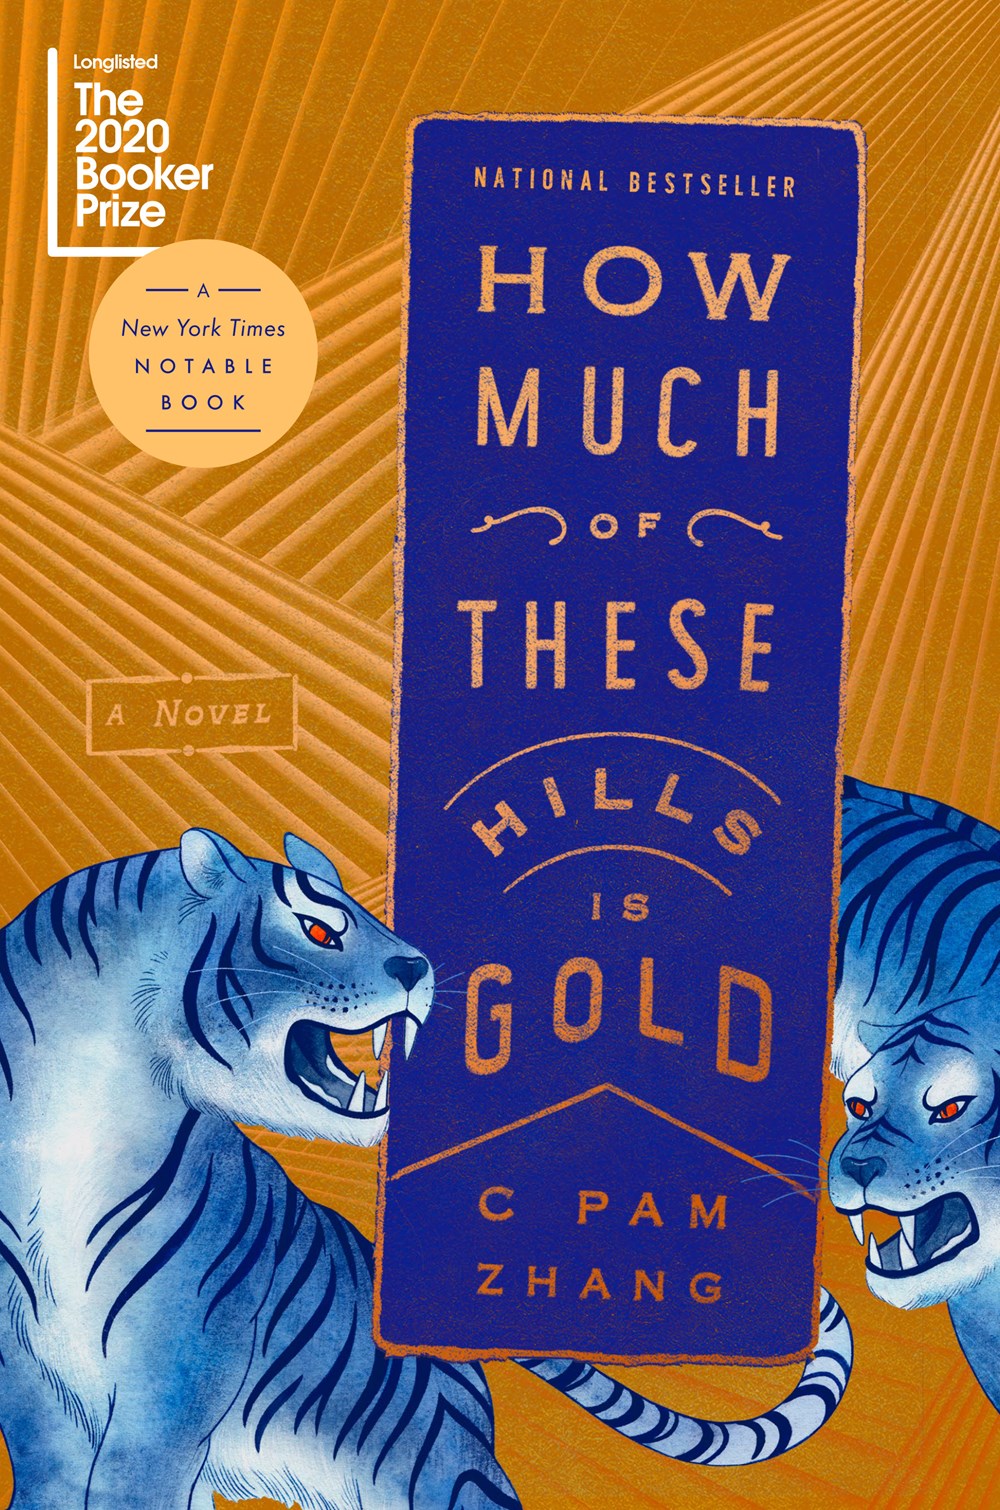 How Much of These Hills is Gold by C. Pam Zhang (Hardcover)